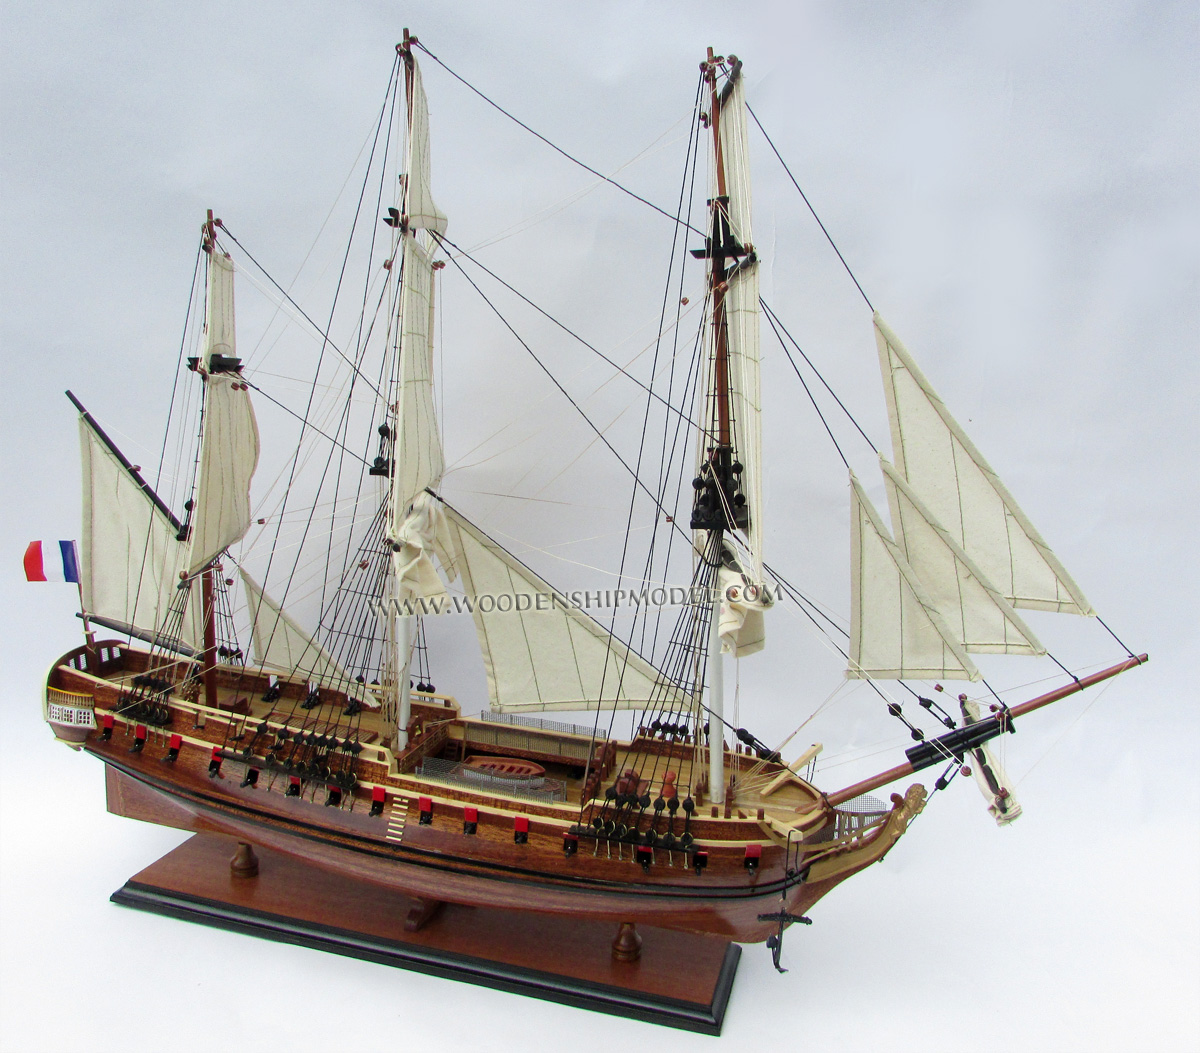 Quality Wooden Model Ship La Fayette Hermione ready for display